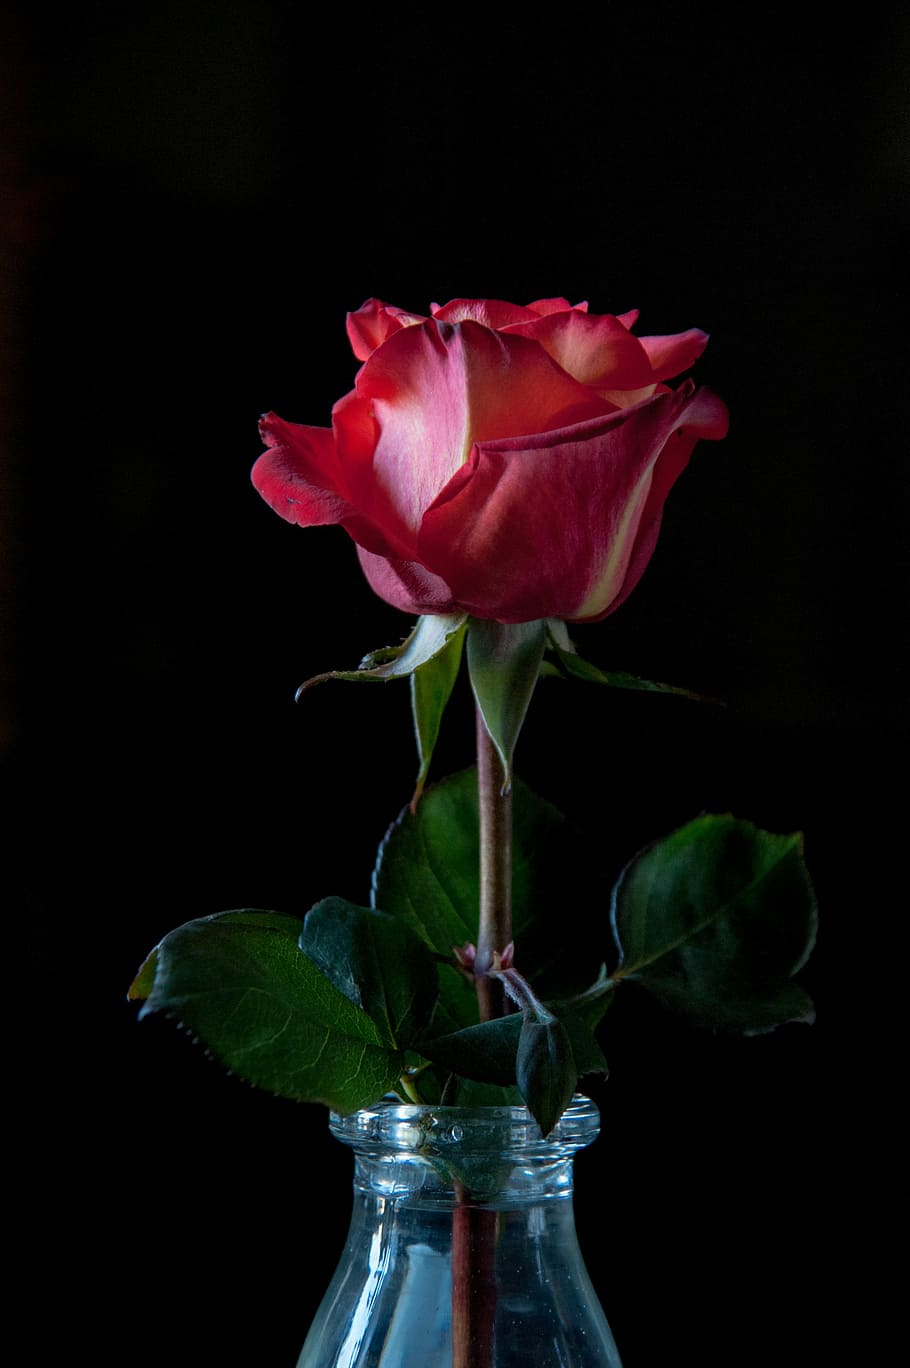 768x1024px Free Download Hd Wallpaper Pink Rose In Clear Glass Vase Black Background Petals Red Rose Wallpaper Flare